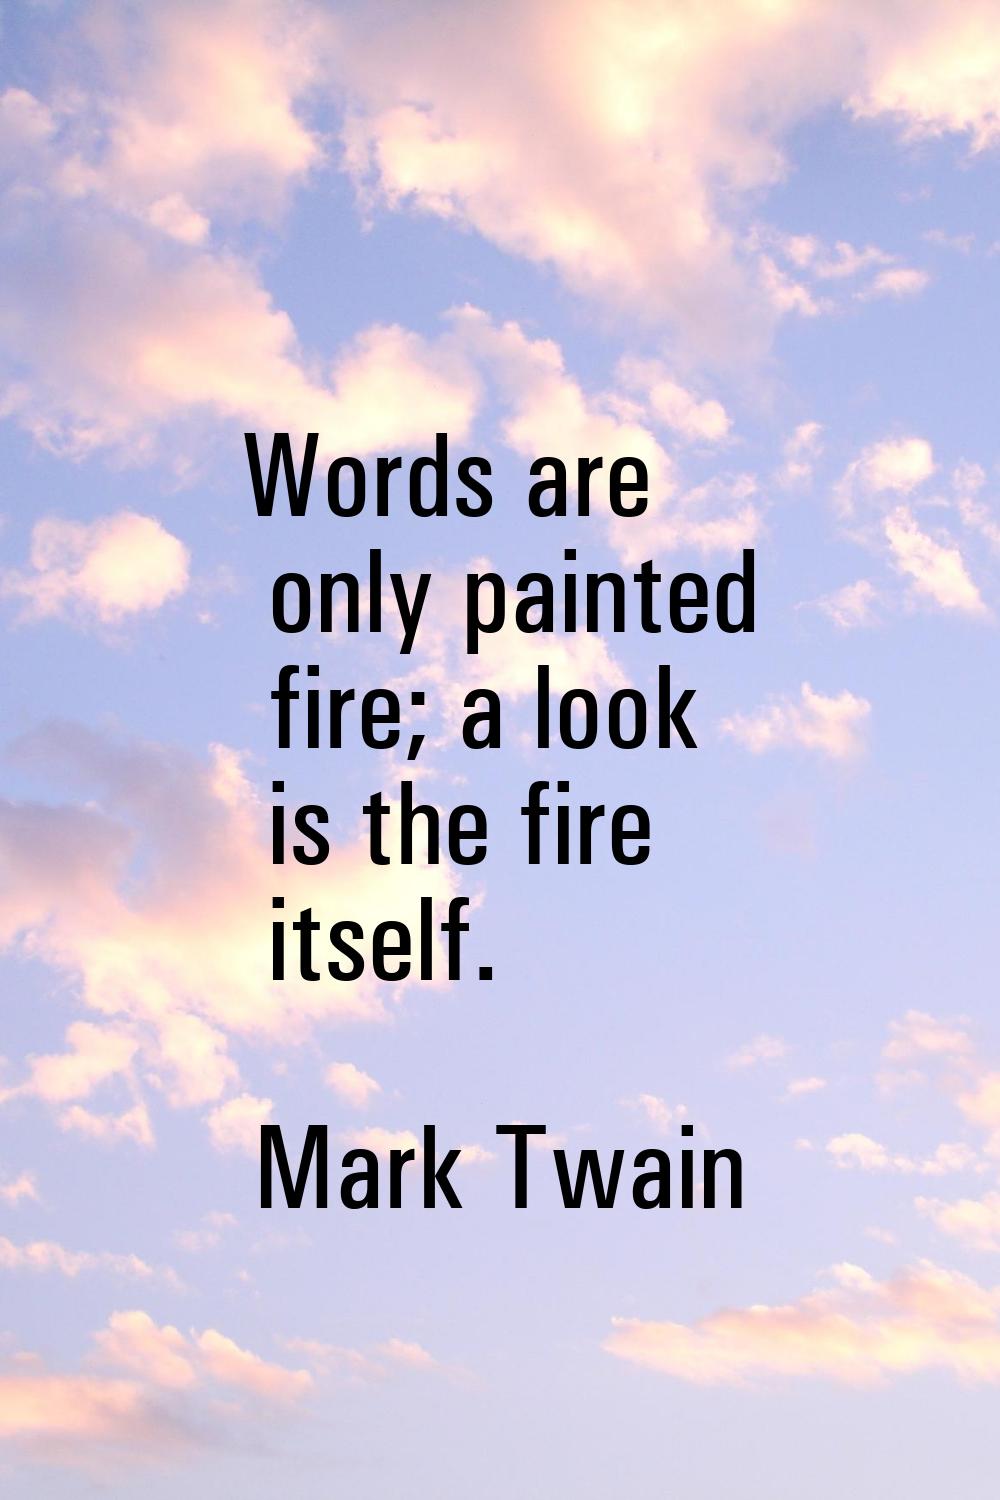 Words are only painted fire; a look is the fire itself.